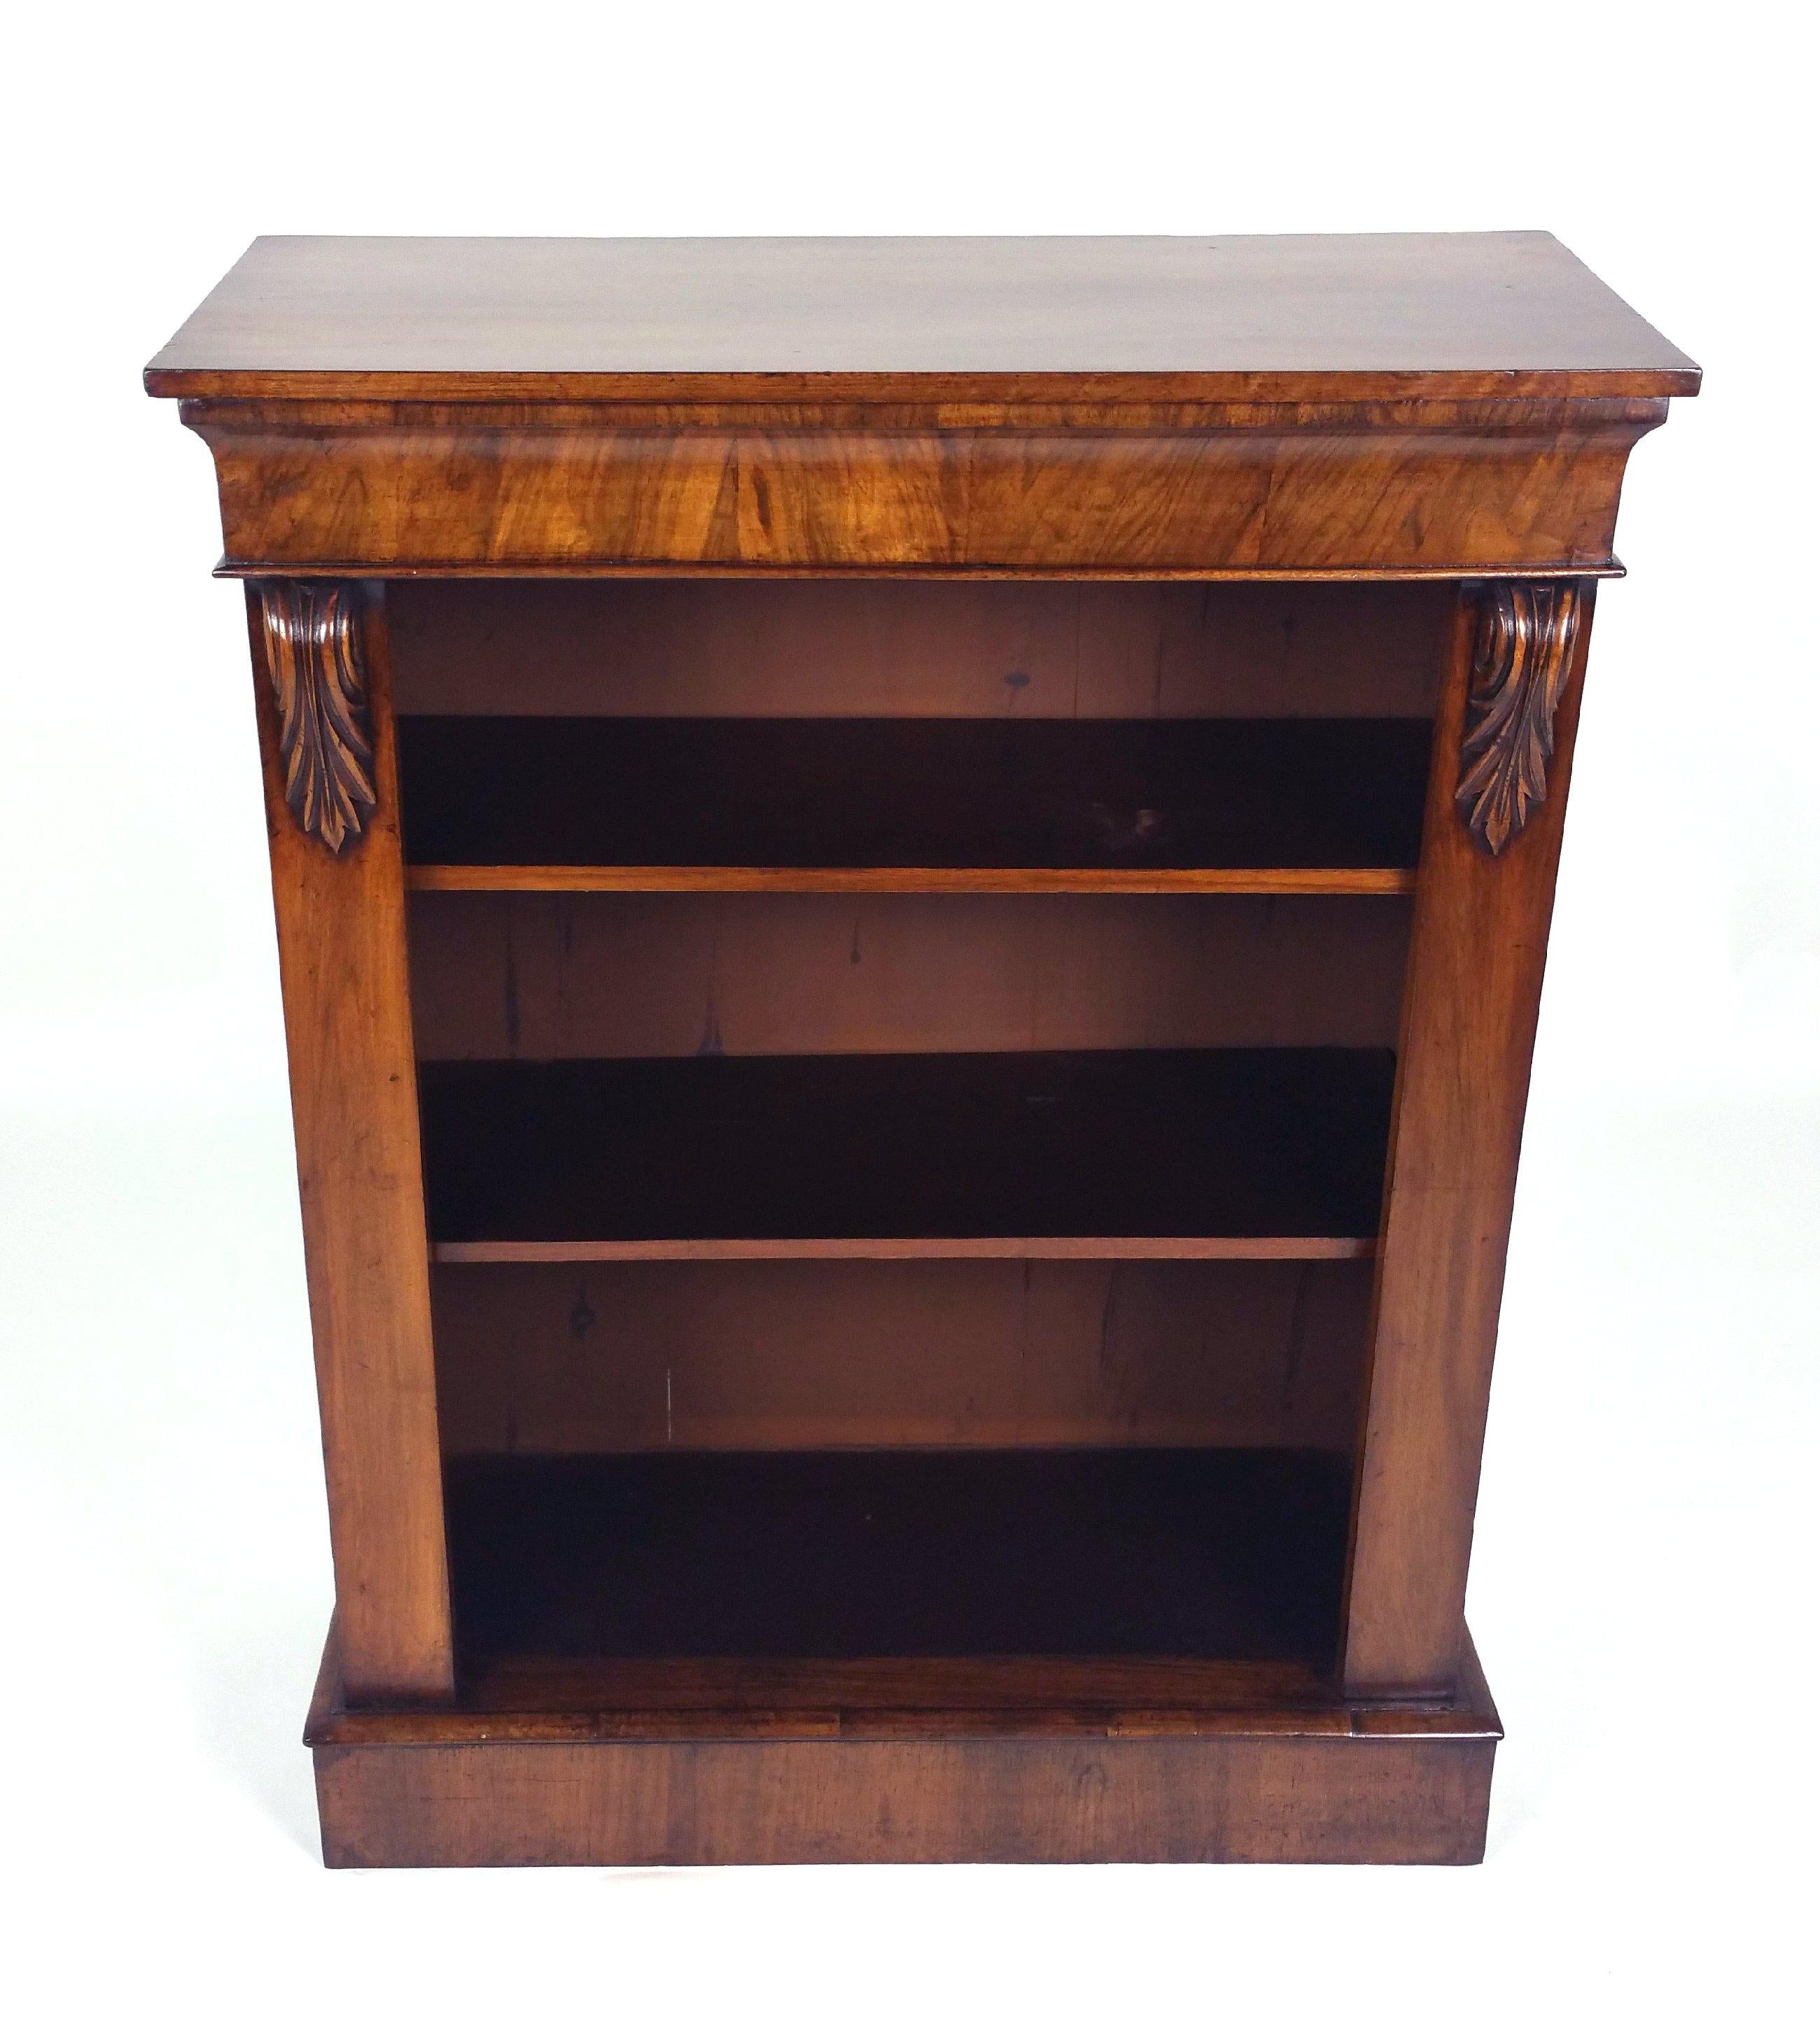 This very handsome Victorian walnut open bookcase features two shelves and is decorated with carved corbels and a shaped frieze. It measures 32 ½ in 82.5 cm wide, 14 in – 35.5 cm deep and 42 in – 106.8 cm in height. This very good quality and